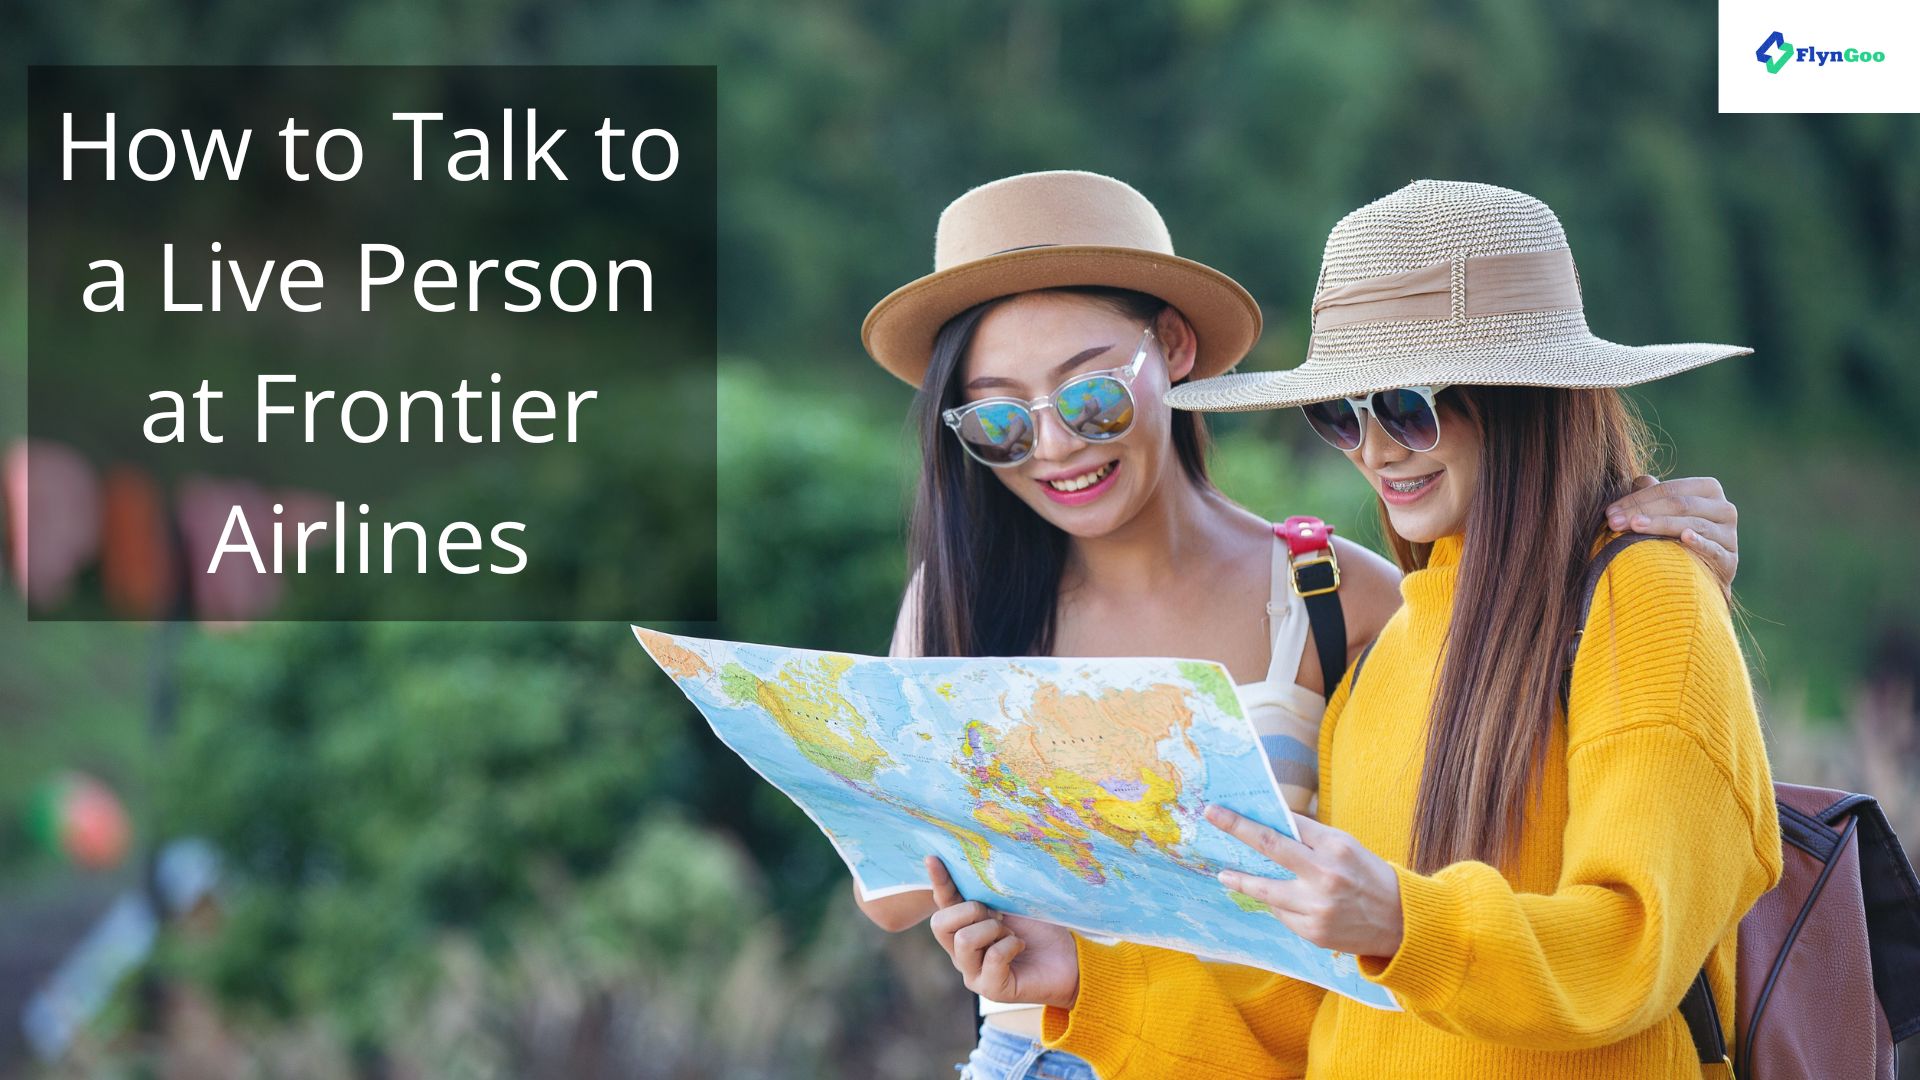 How to Talk to a Live Person at Frontier Airlines?